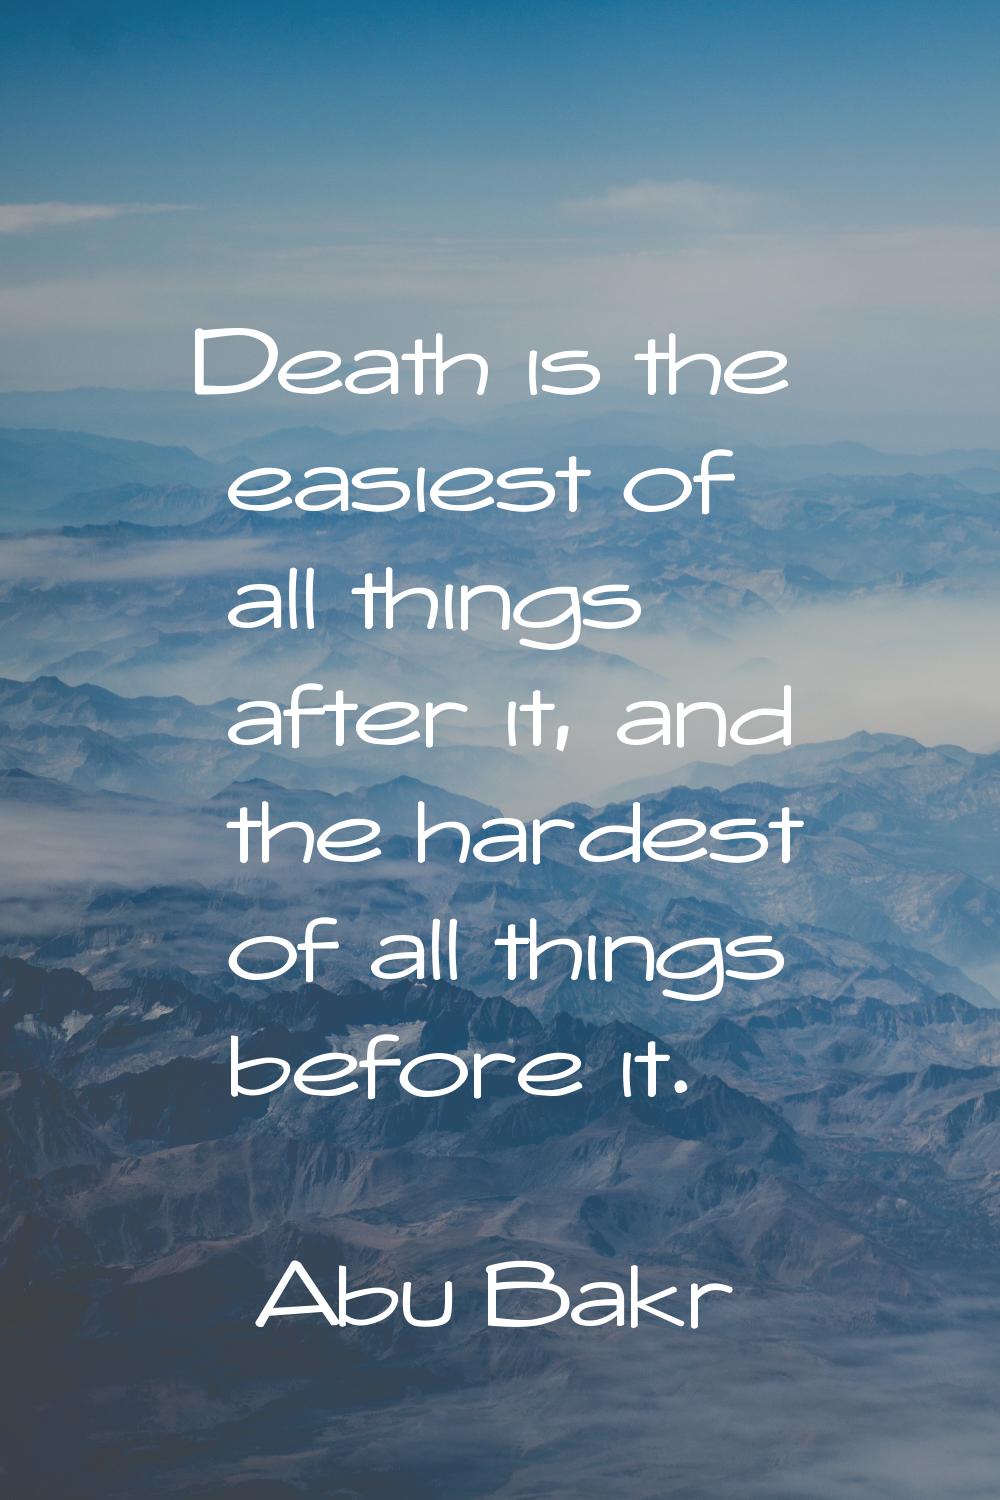 Death is the easiest of all things after it, and the hardest of all things before it.